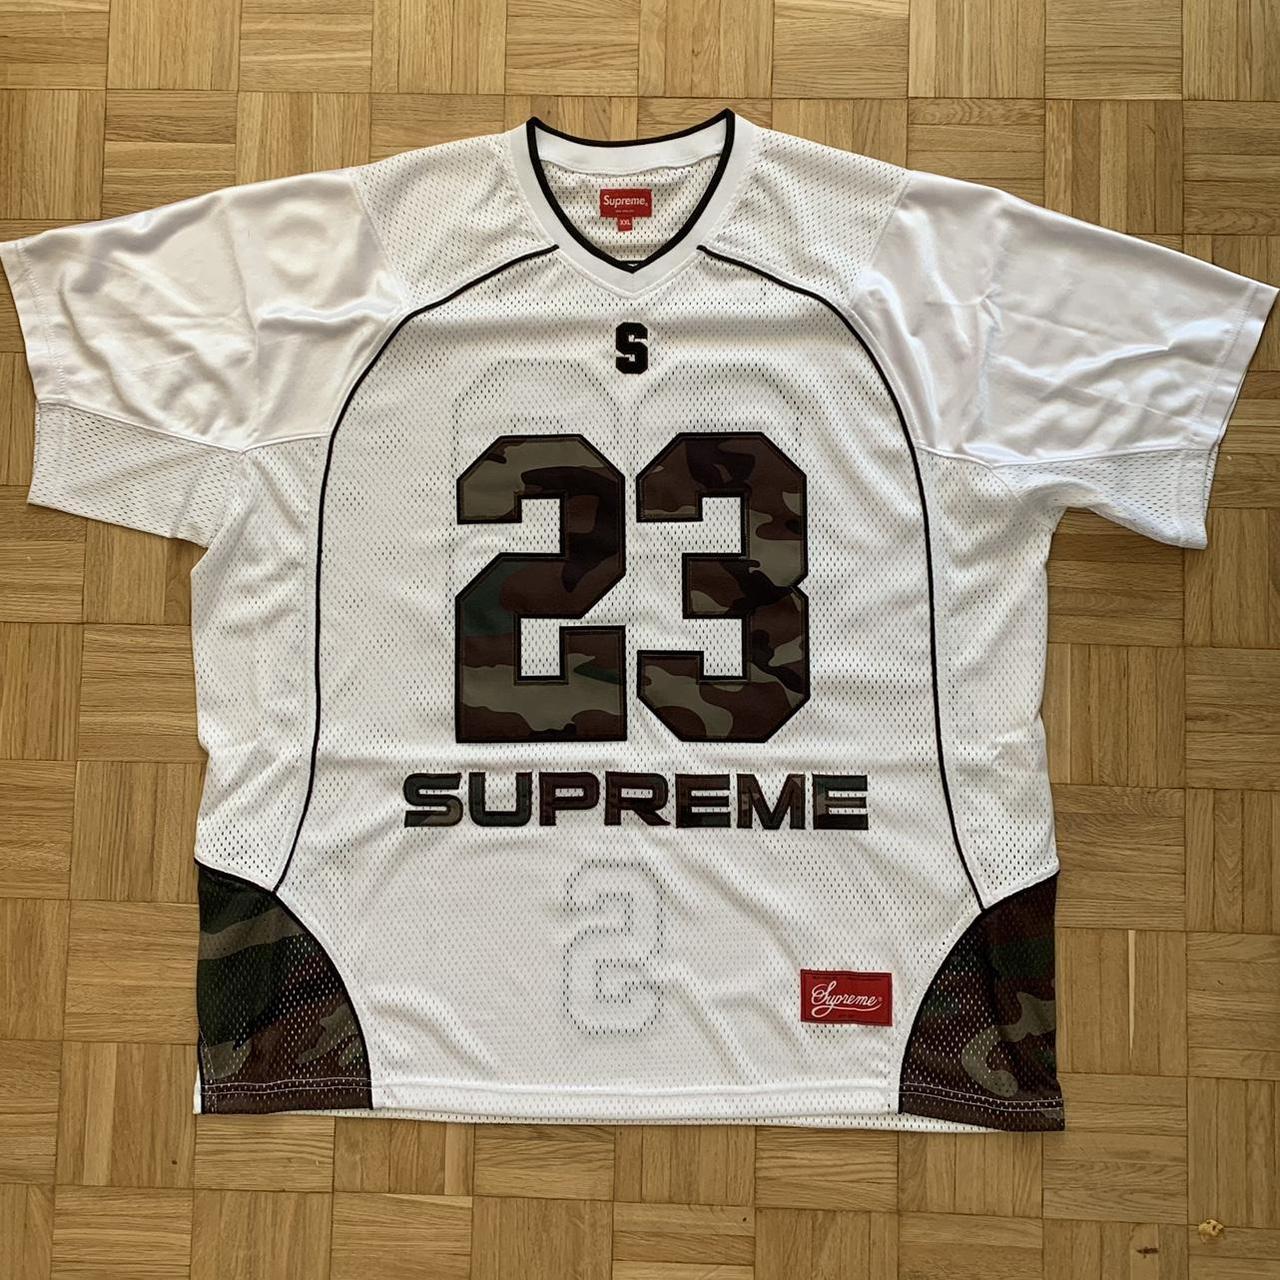 Supreme Soccer Jersey. Perfect for summer, barely - Depop